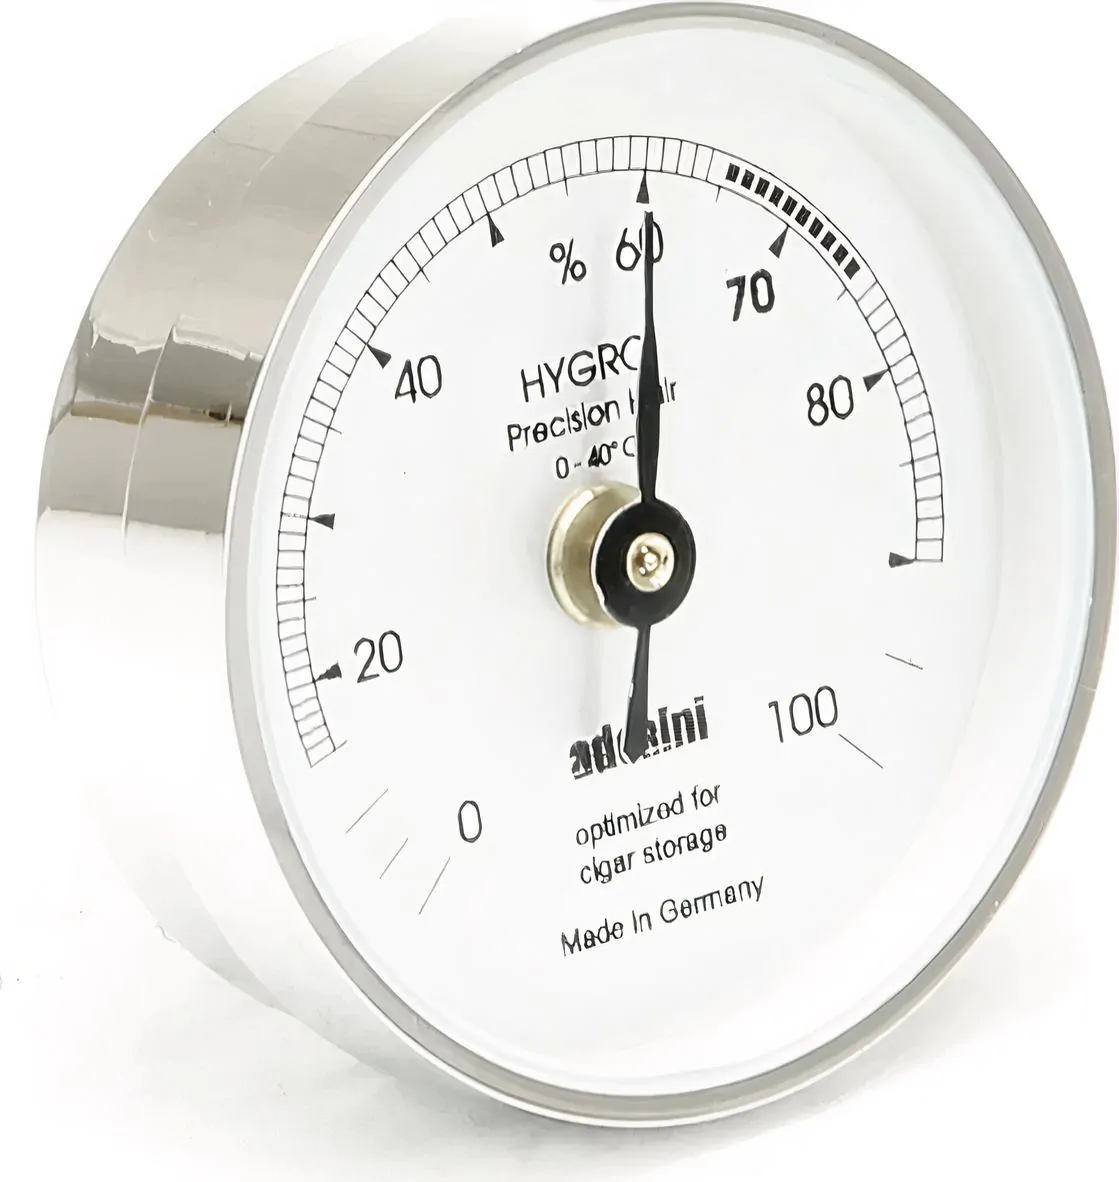 143 | Hygrometer synthetic with thermometer